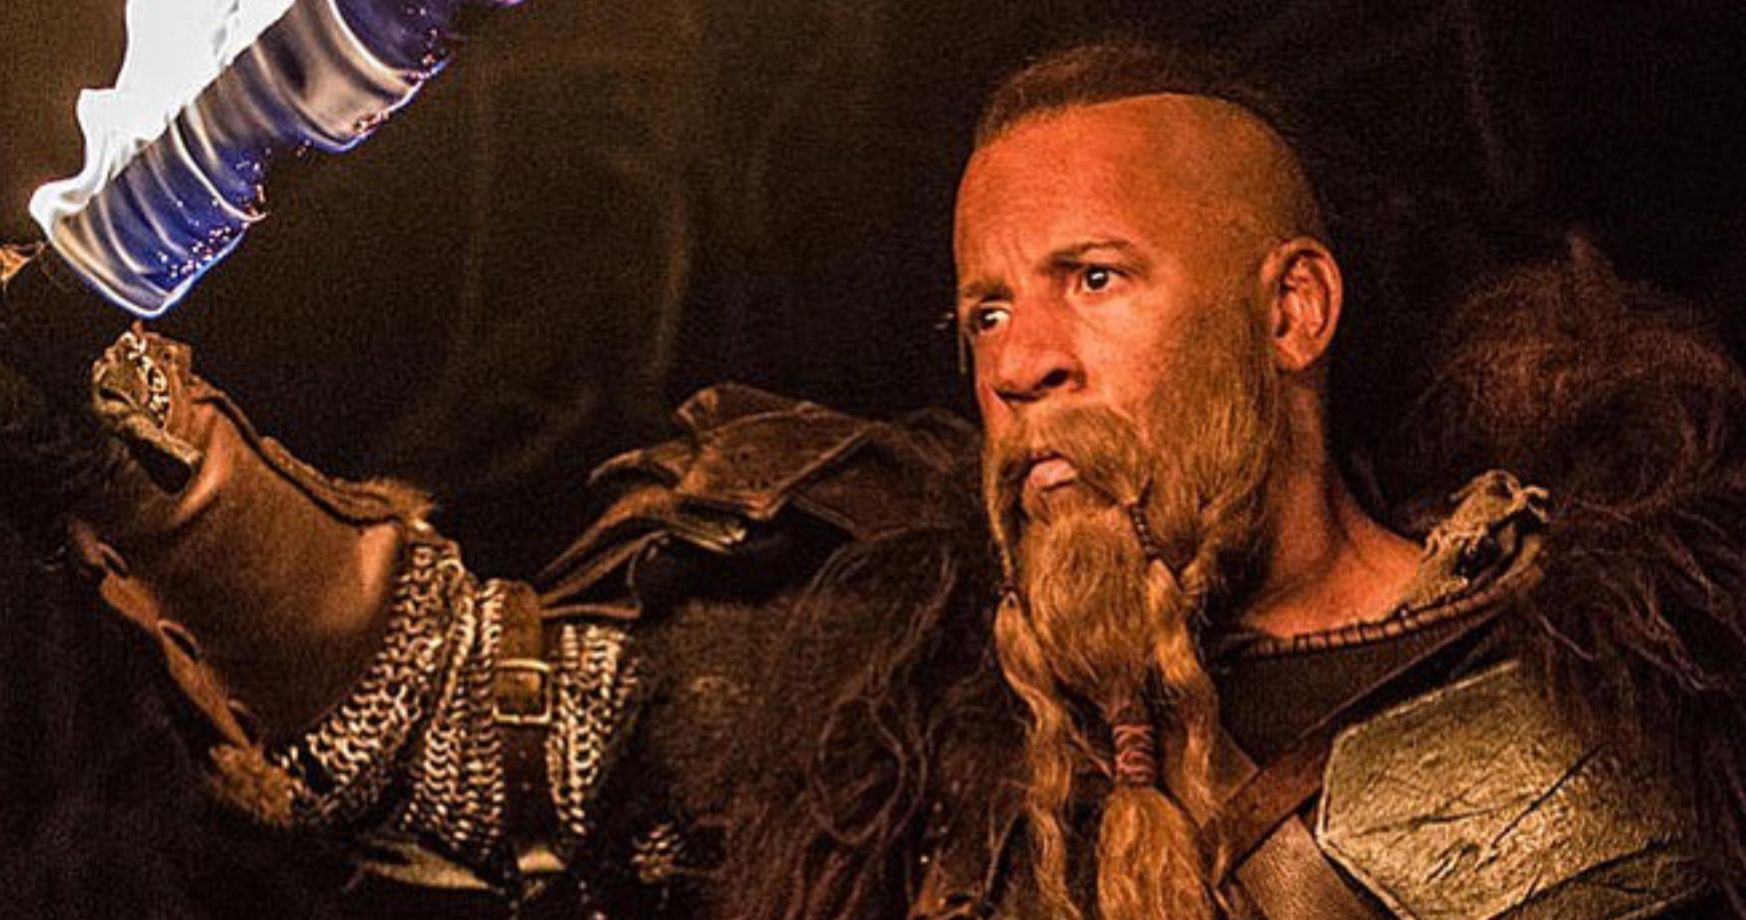 The Last Witch Hunter 2 Script Teased by Vin Diesel While in Self-Isolation